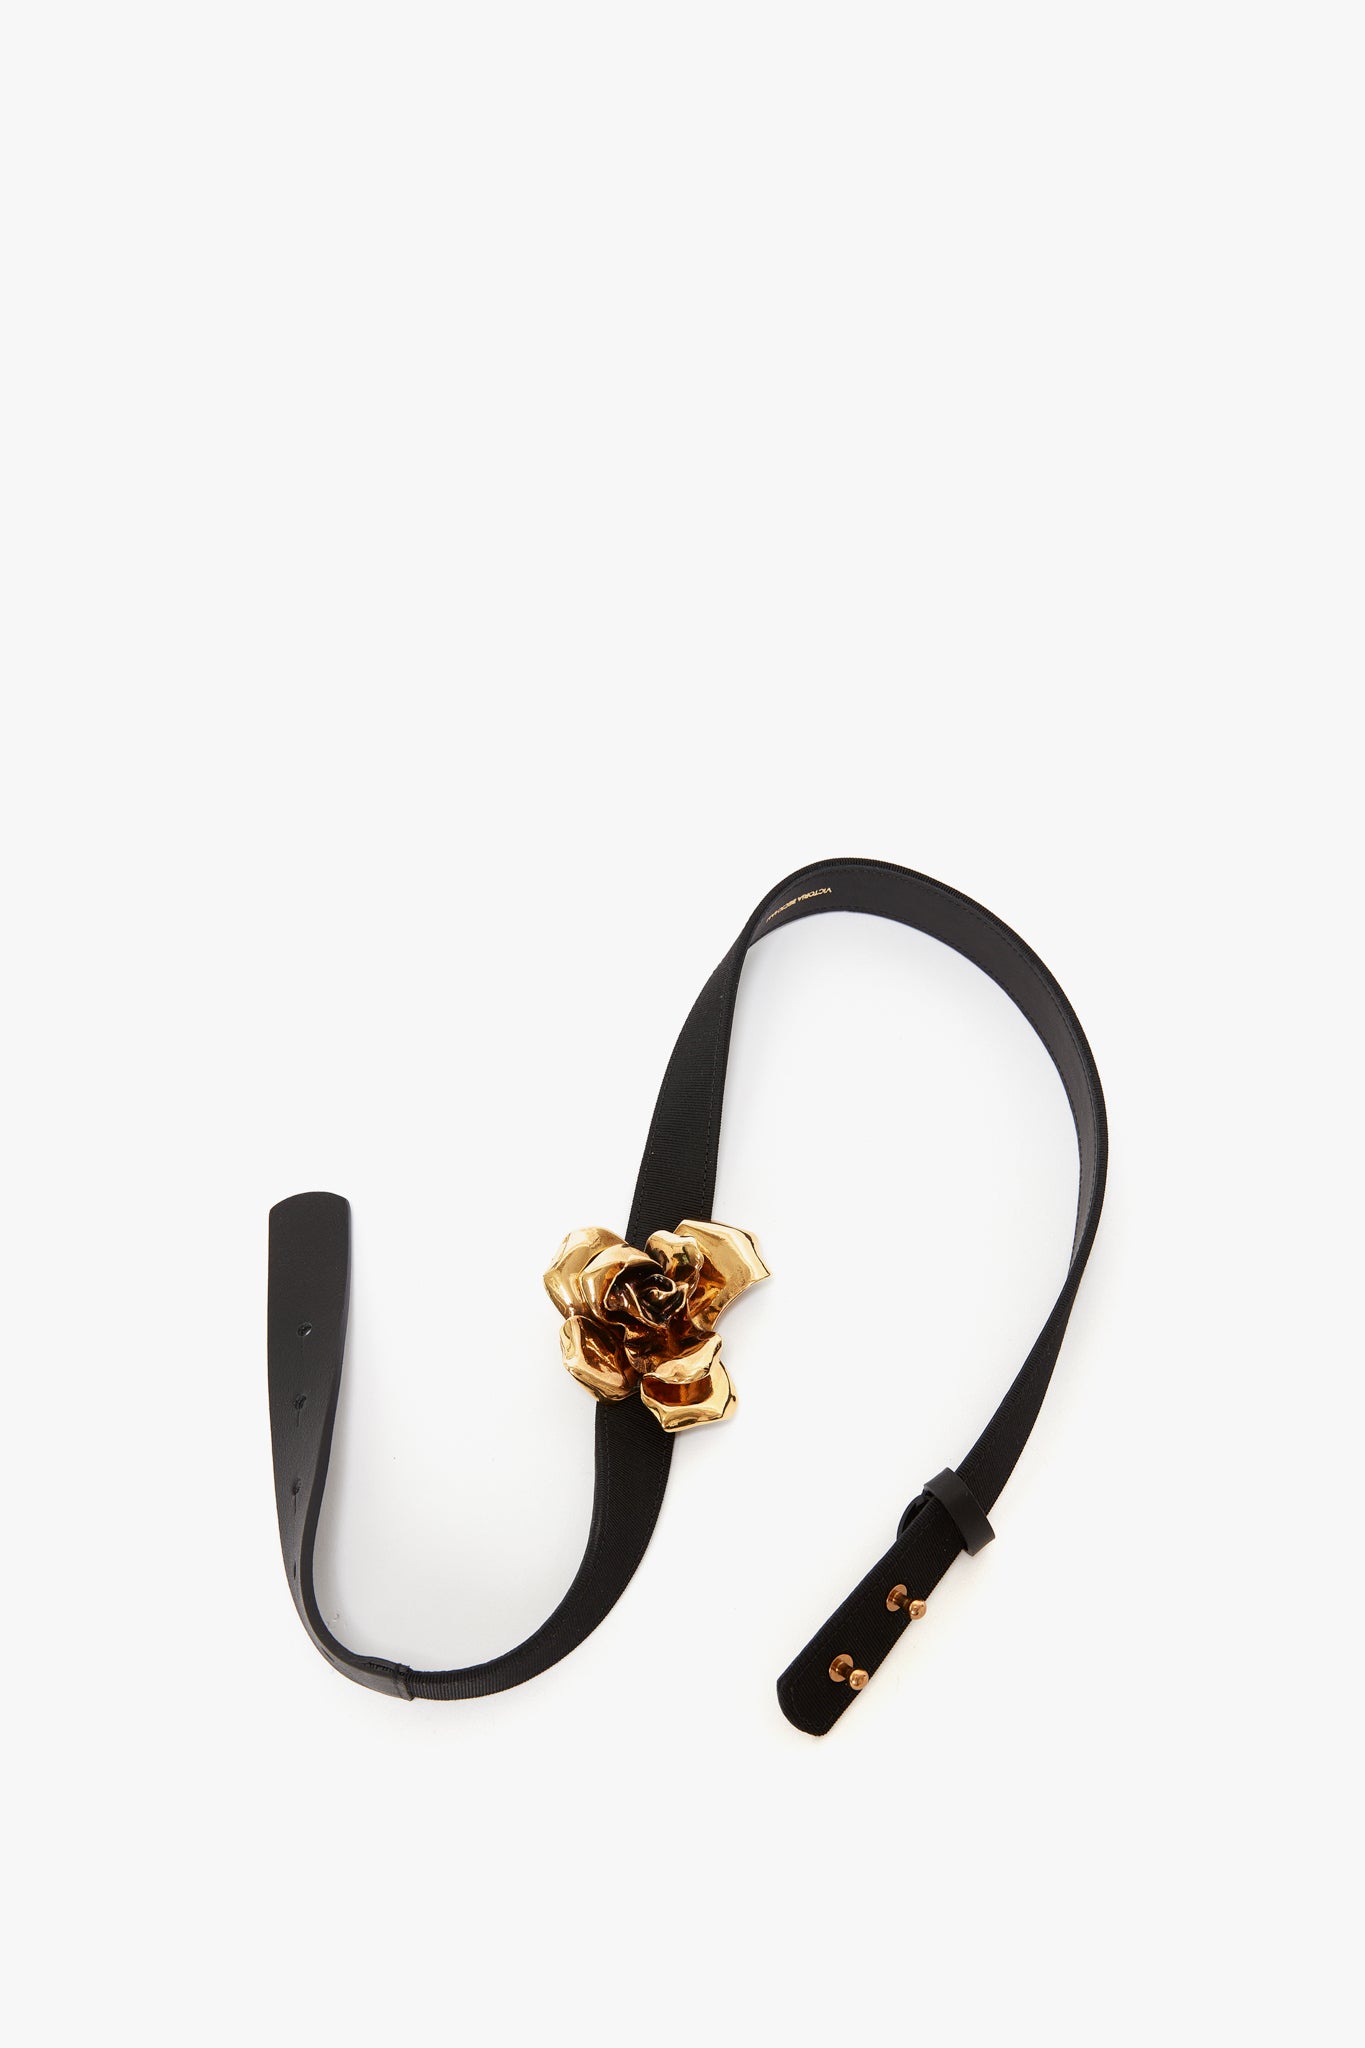 Exclusive Flower Belt In Black and Gold